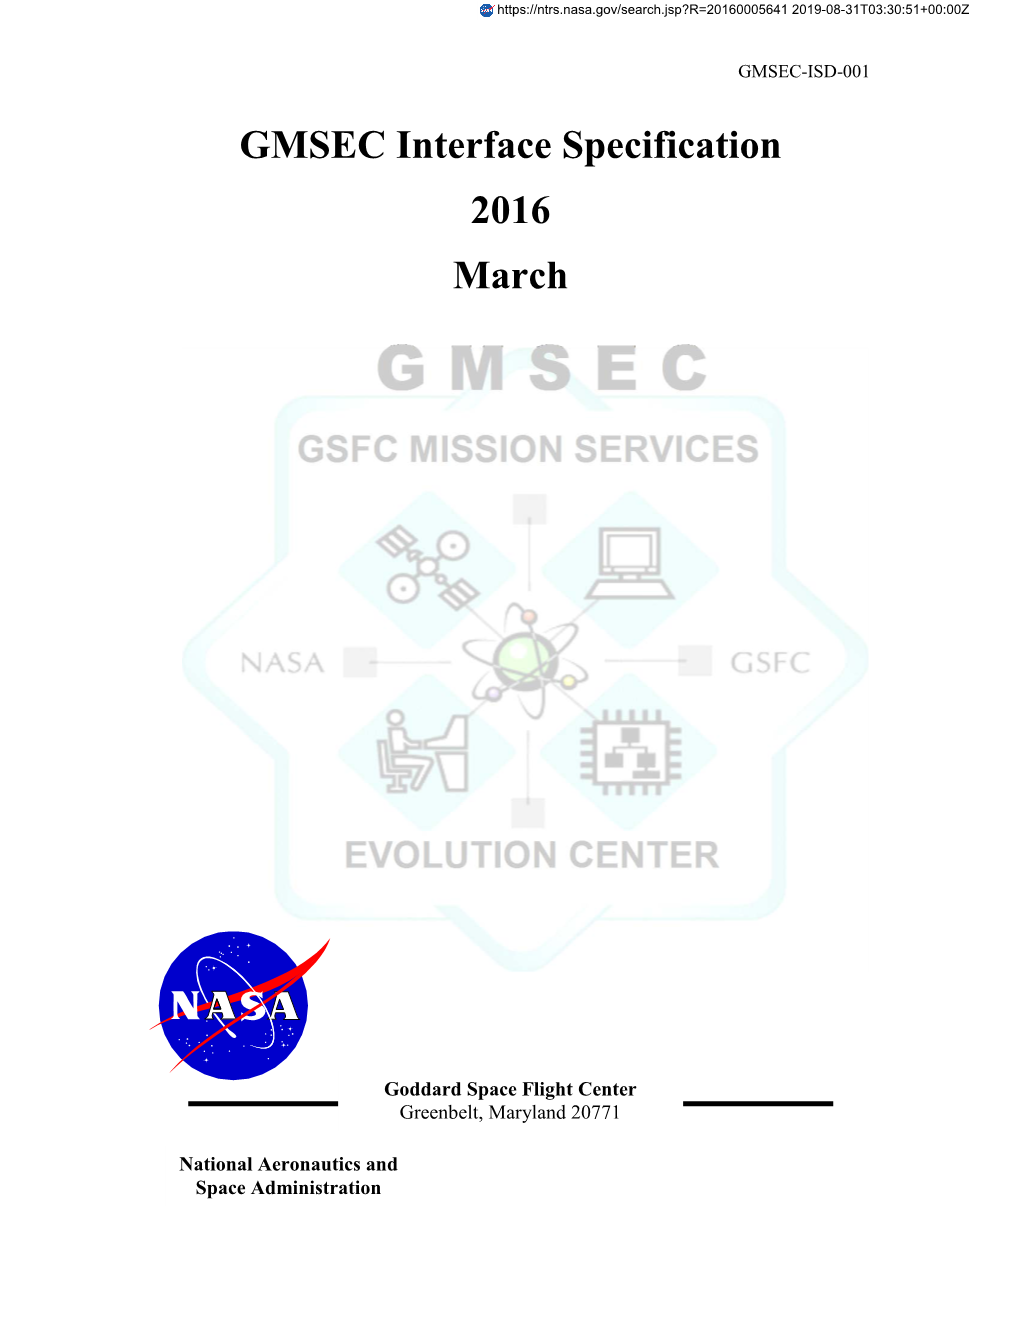 GMSEC Interface Specification Document